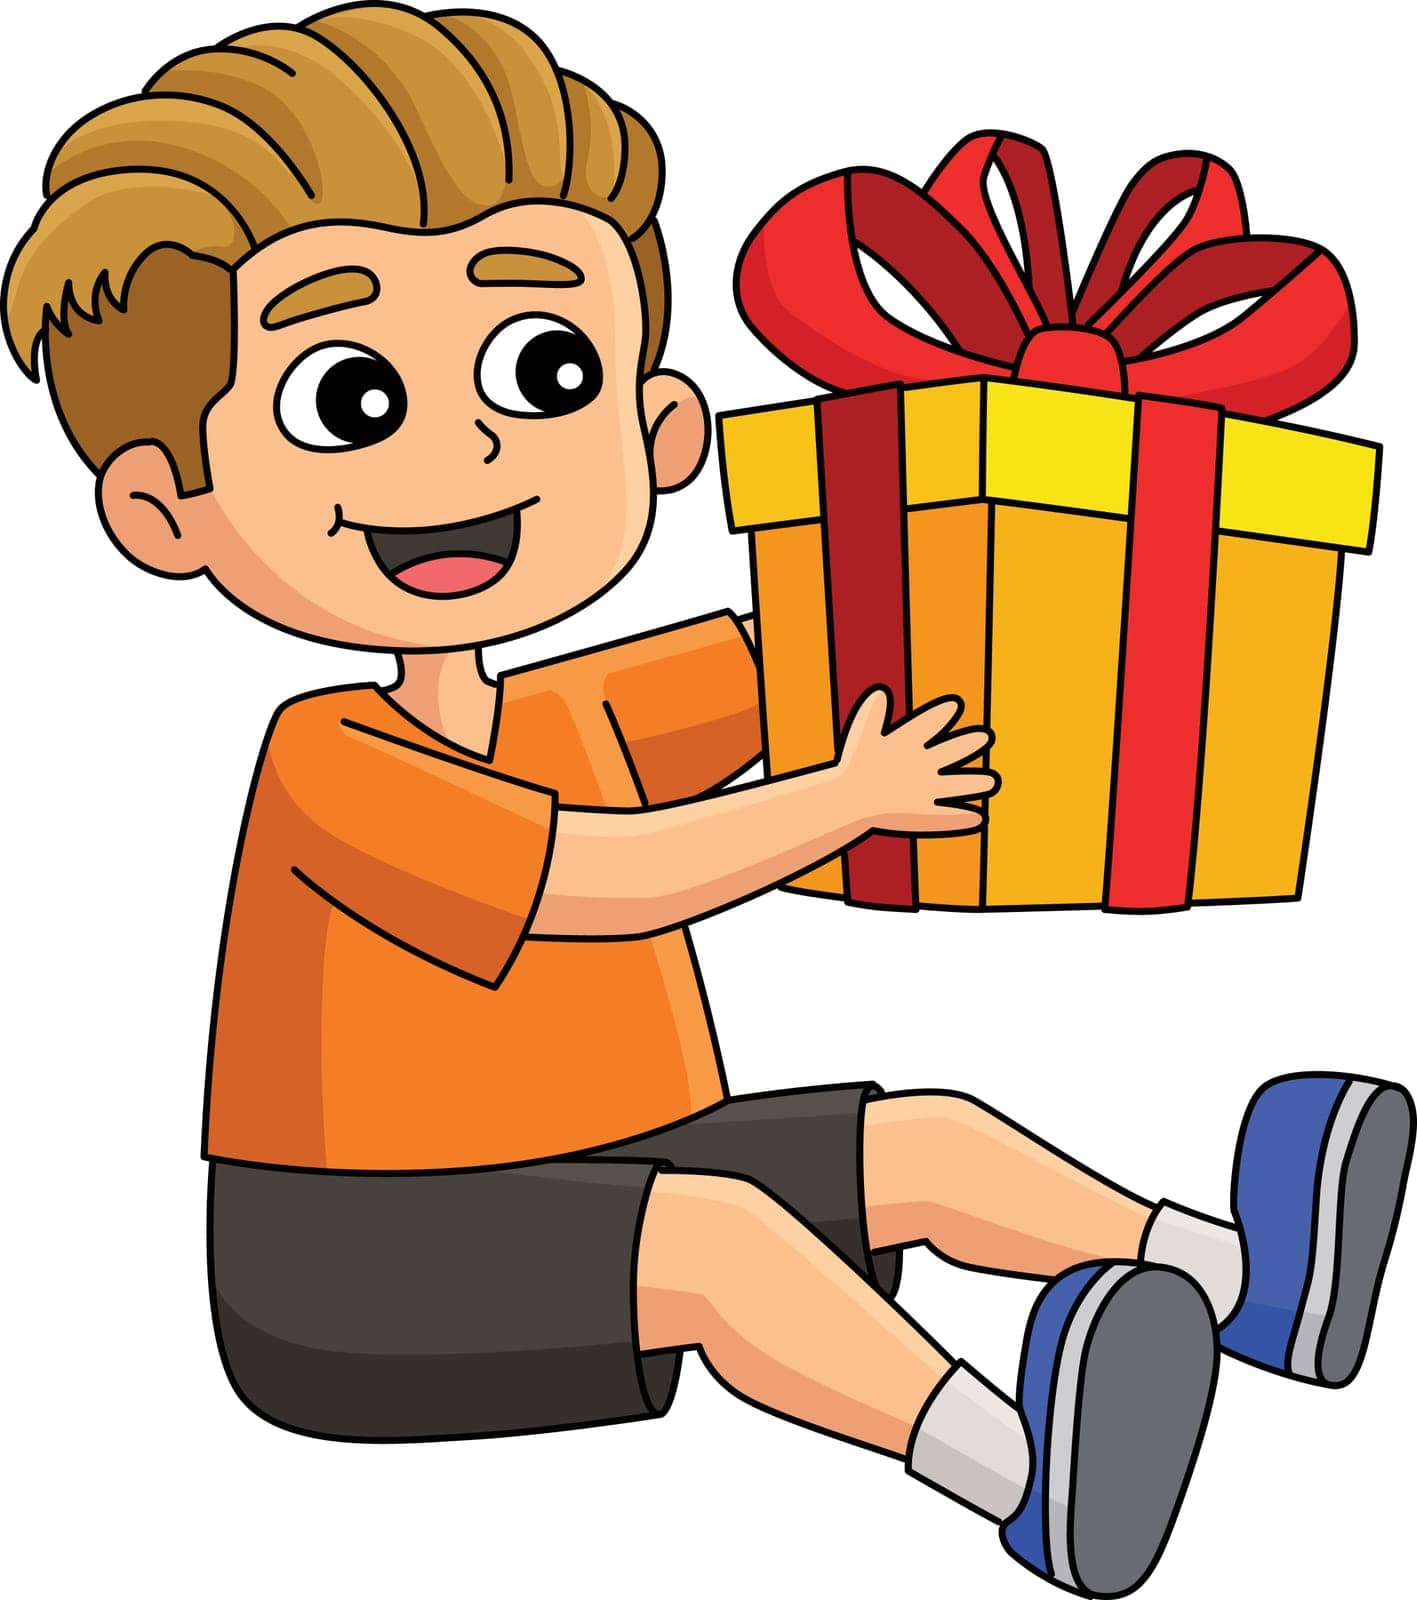 This cartoon clipart shows a Boy with a Birthday Present illustration.